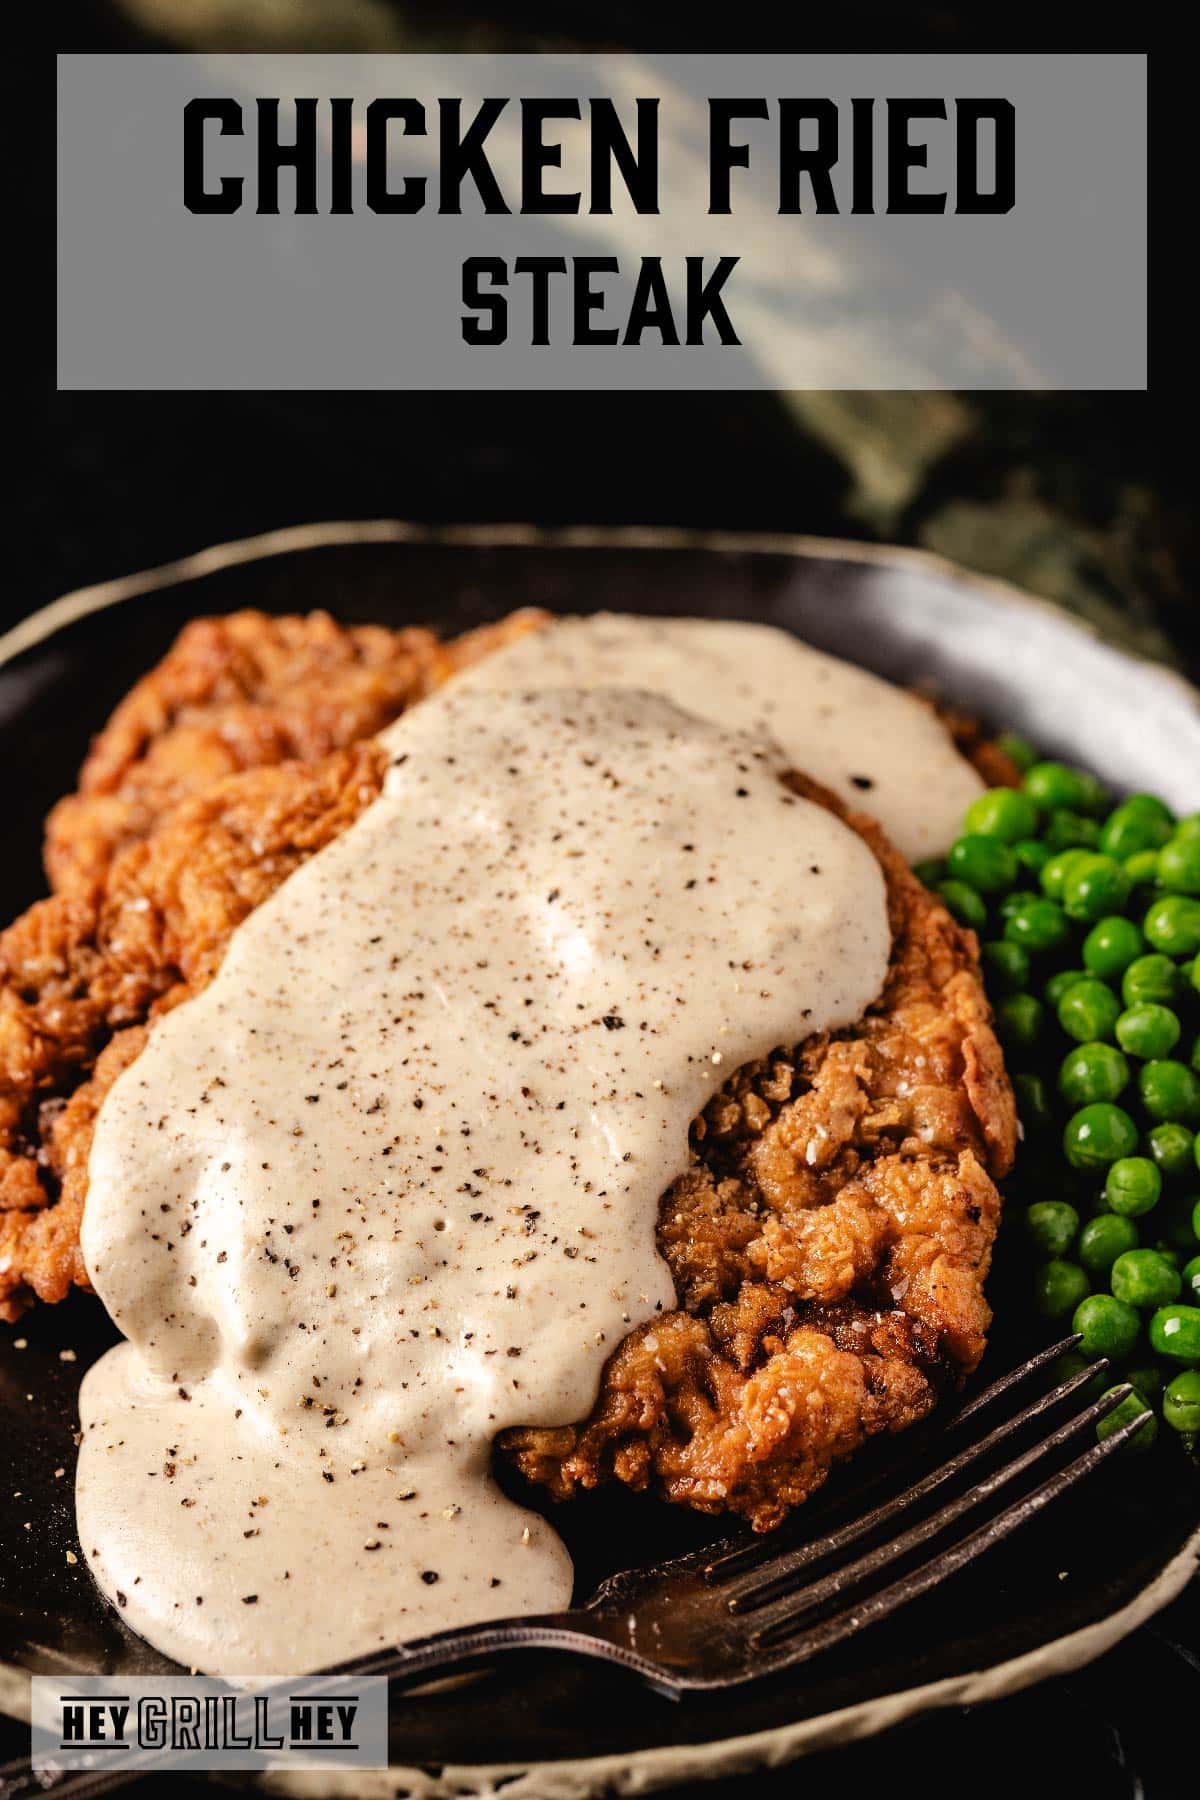 Breaded steak covered in gravy on metal plate with peas. Text reads "Chicken Fried Steak".